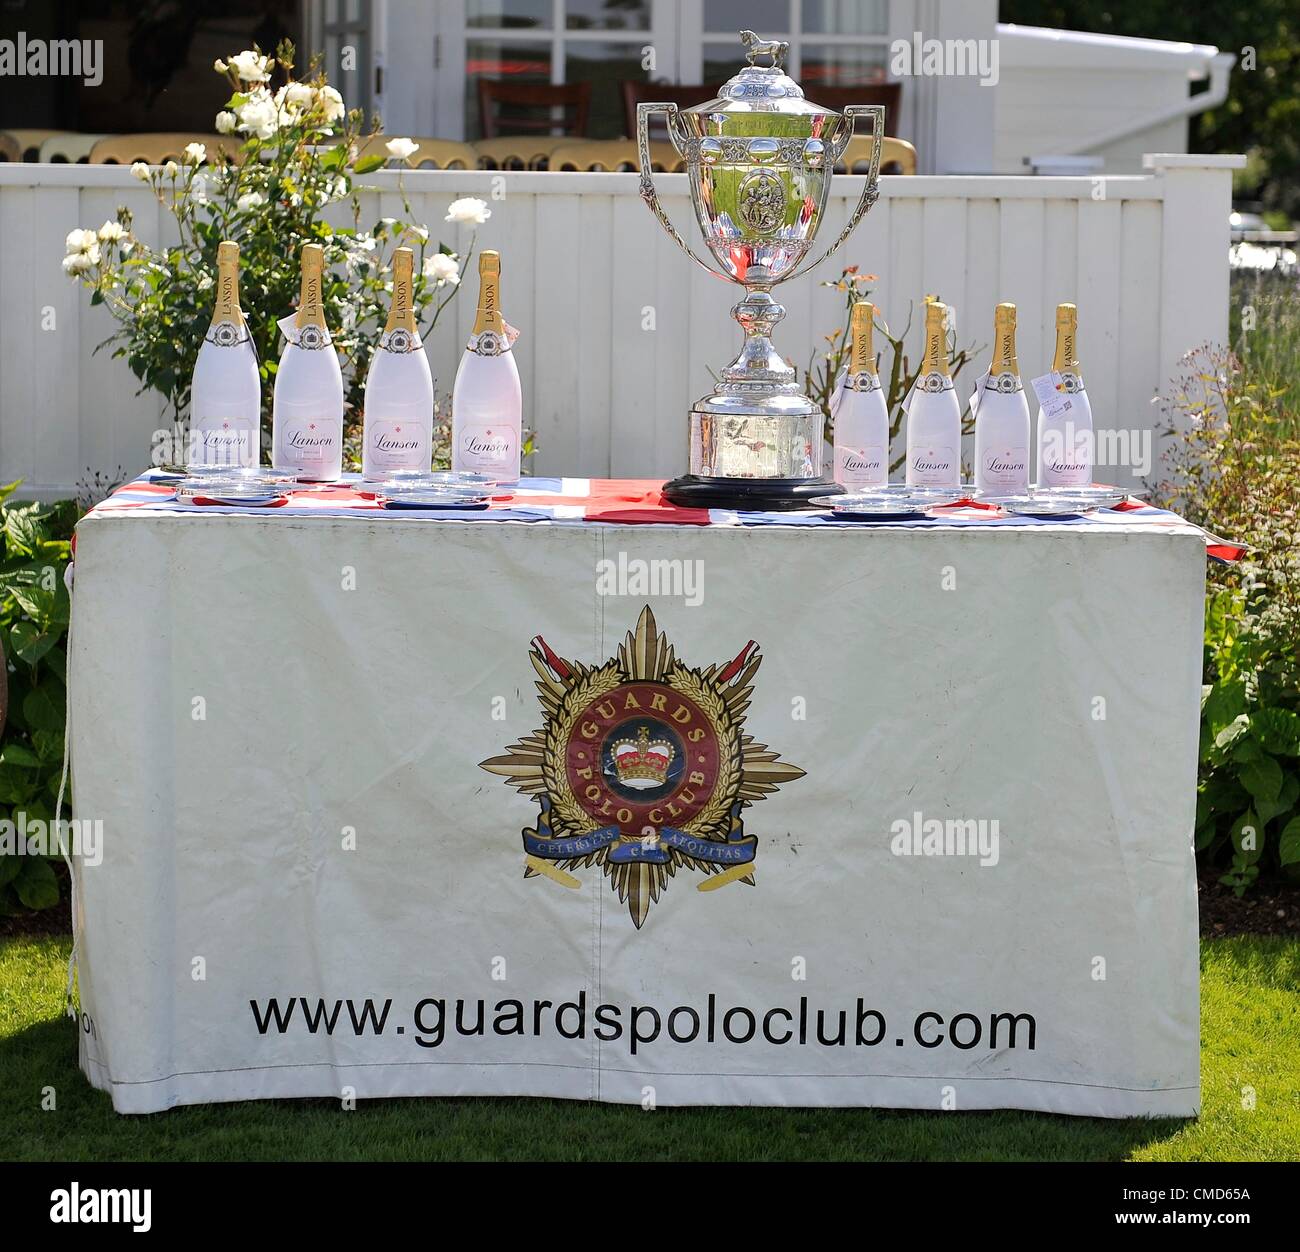 22.7.2012. Egham, Surrey, England. The Diamond Jubilee Trophy. The AUDI International Polo featuring the Coronation Cup at Guards Polo Club, Smith's Lawn, Windsor Great Park, Egham, Surrey, England on 22 July 2012. Stock Photo